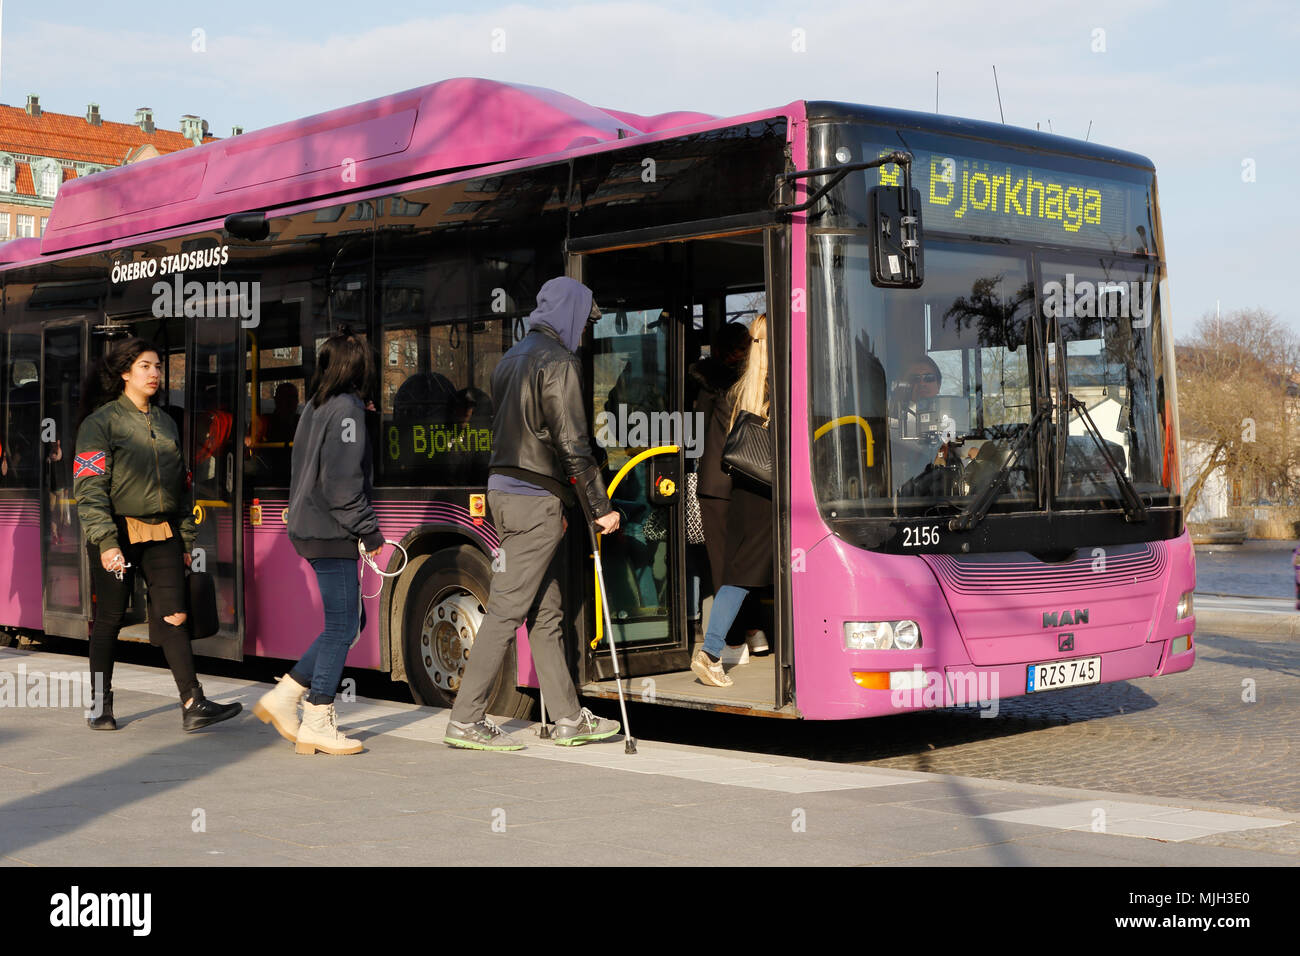 Orebro, Sweden - April 4, 2017:: Passengers boarding a violet city bus at the stop Jarntorget. Stock Photo